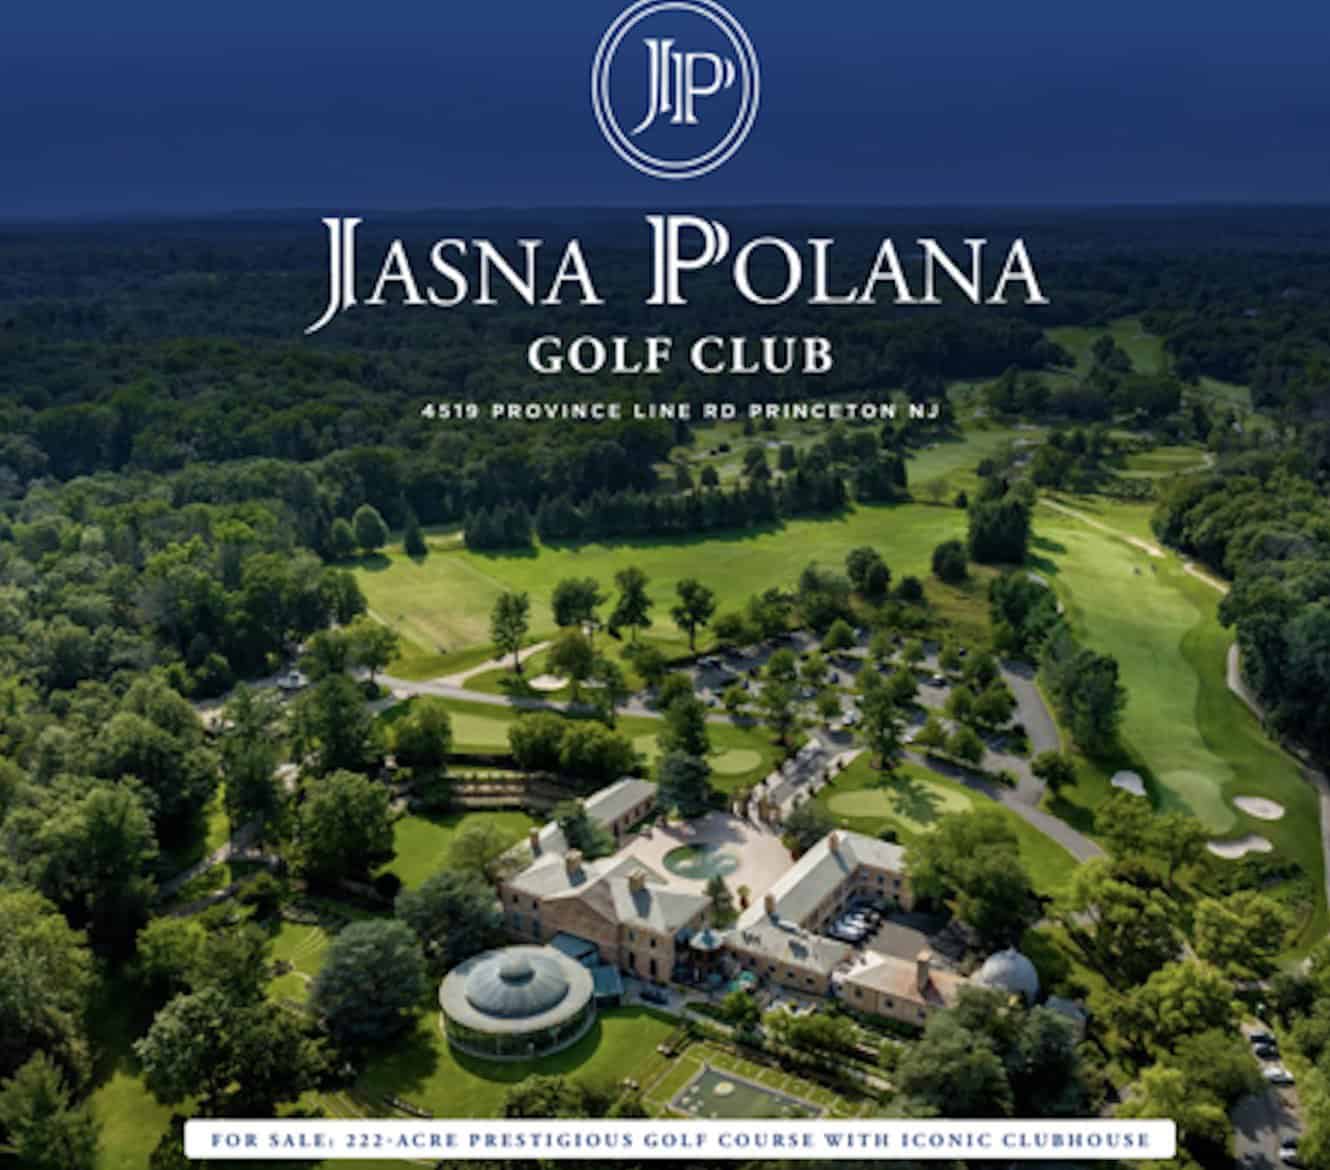 Princeton governing body issues statement on Jasna Polana marketing materials